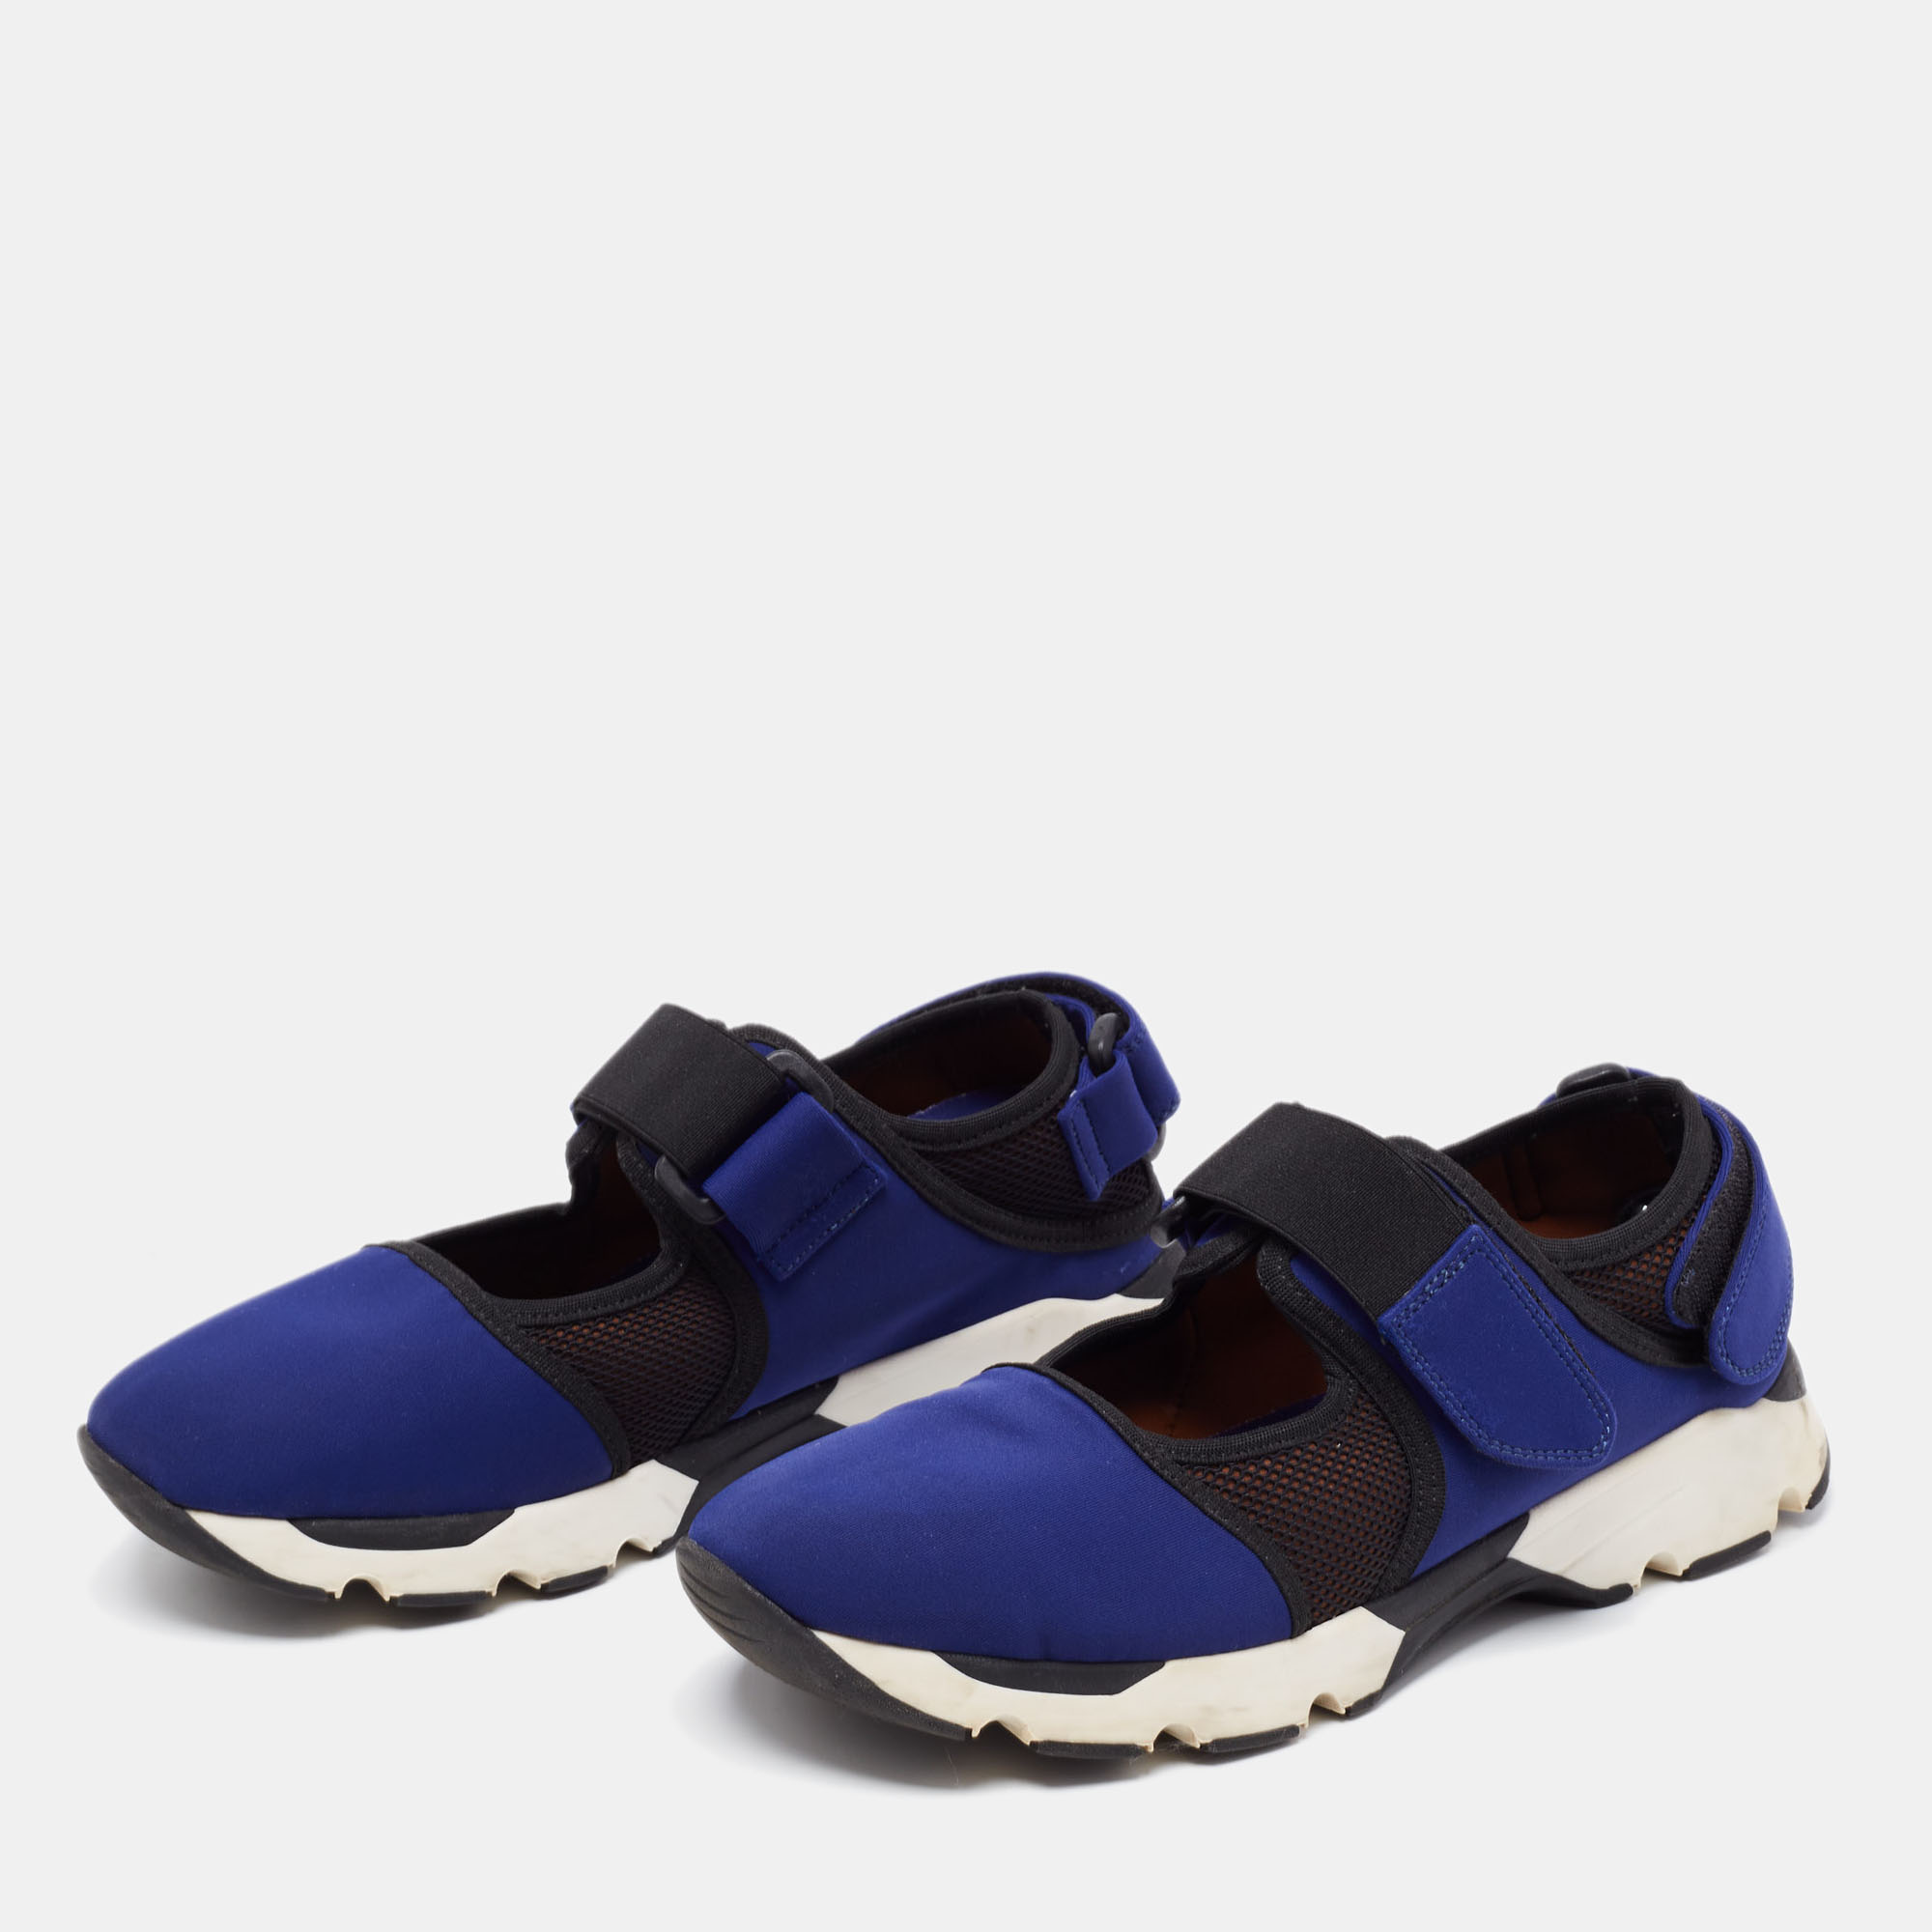 

Marni Blue/Black Neoprene and Mesh Low Top Sneakers Size